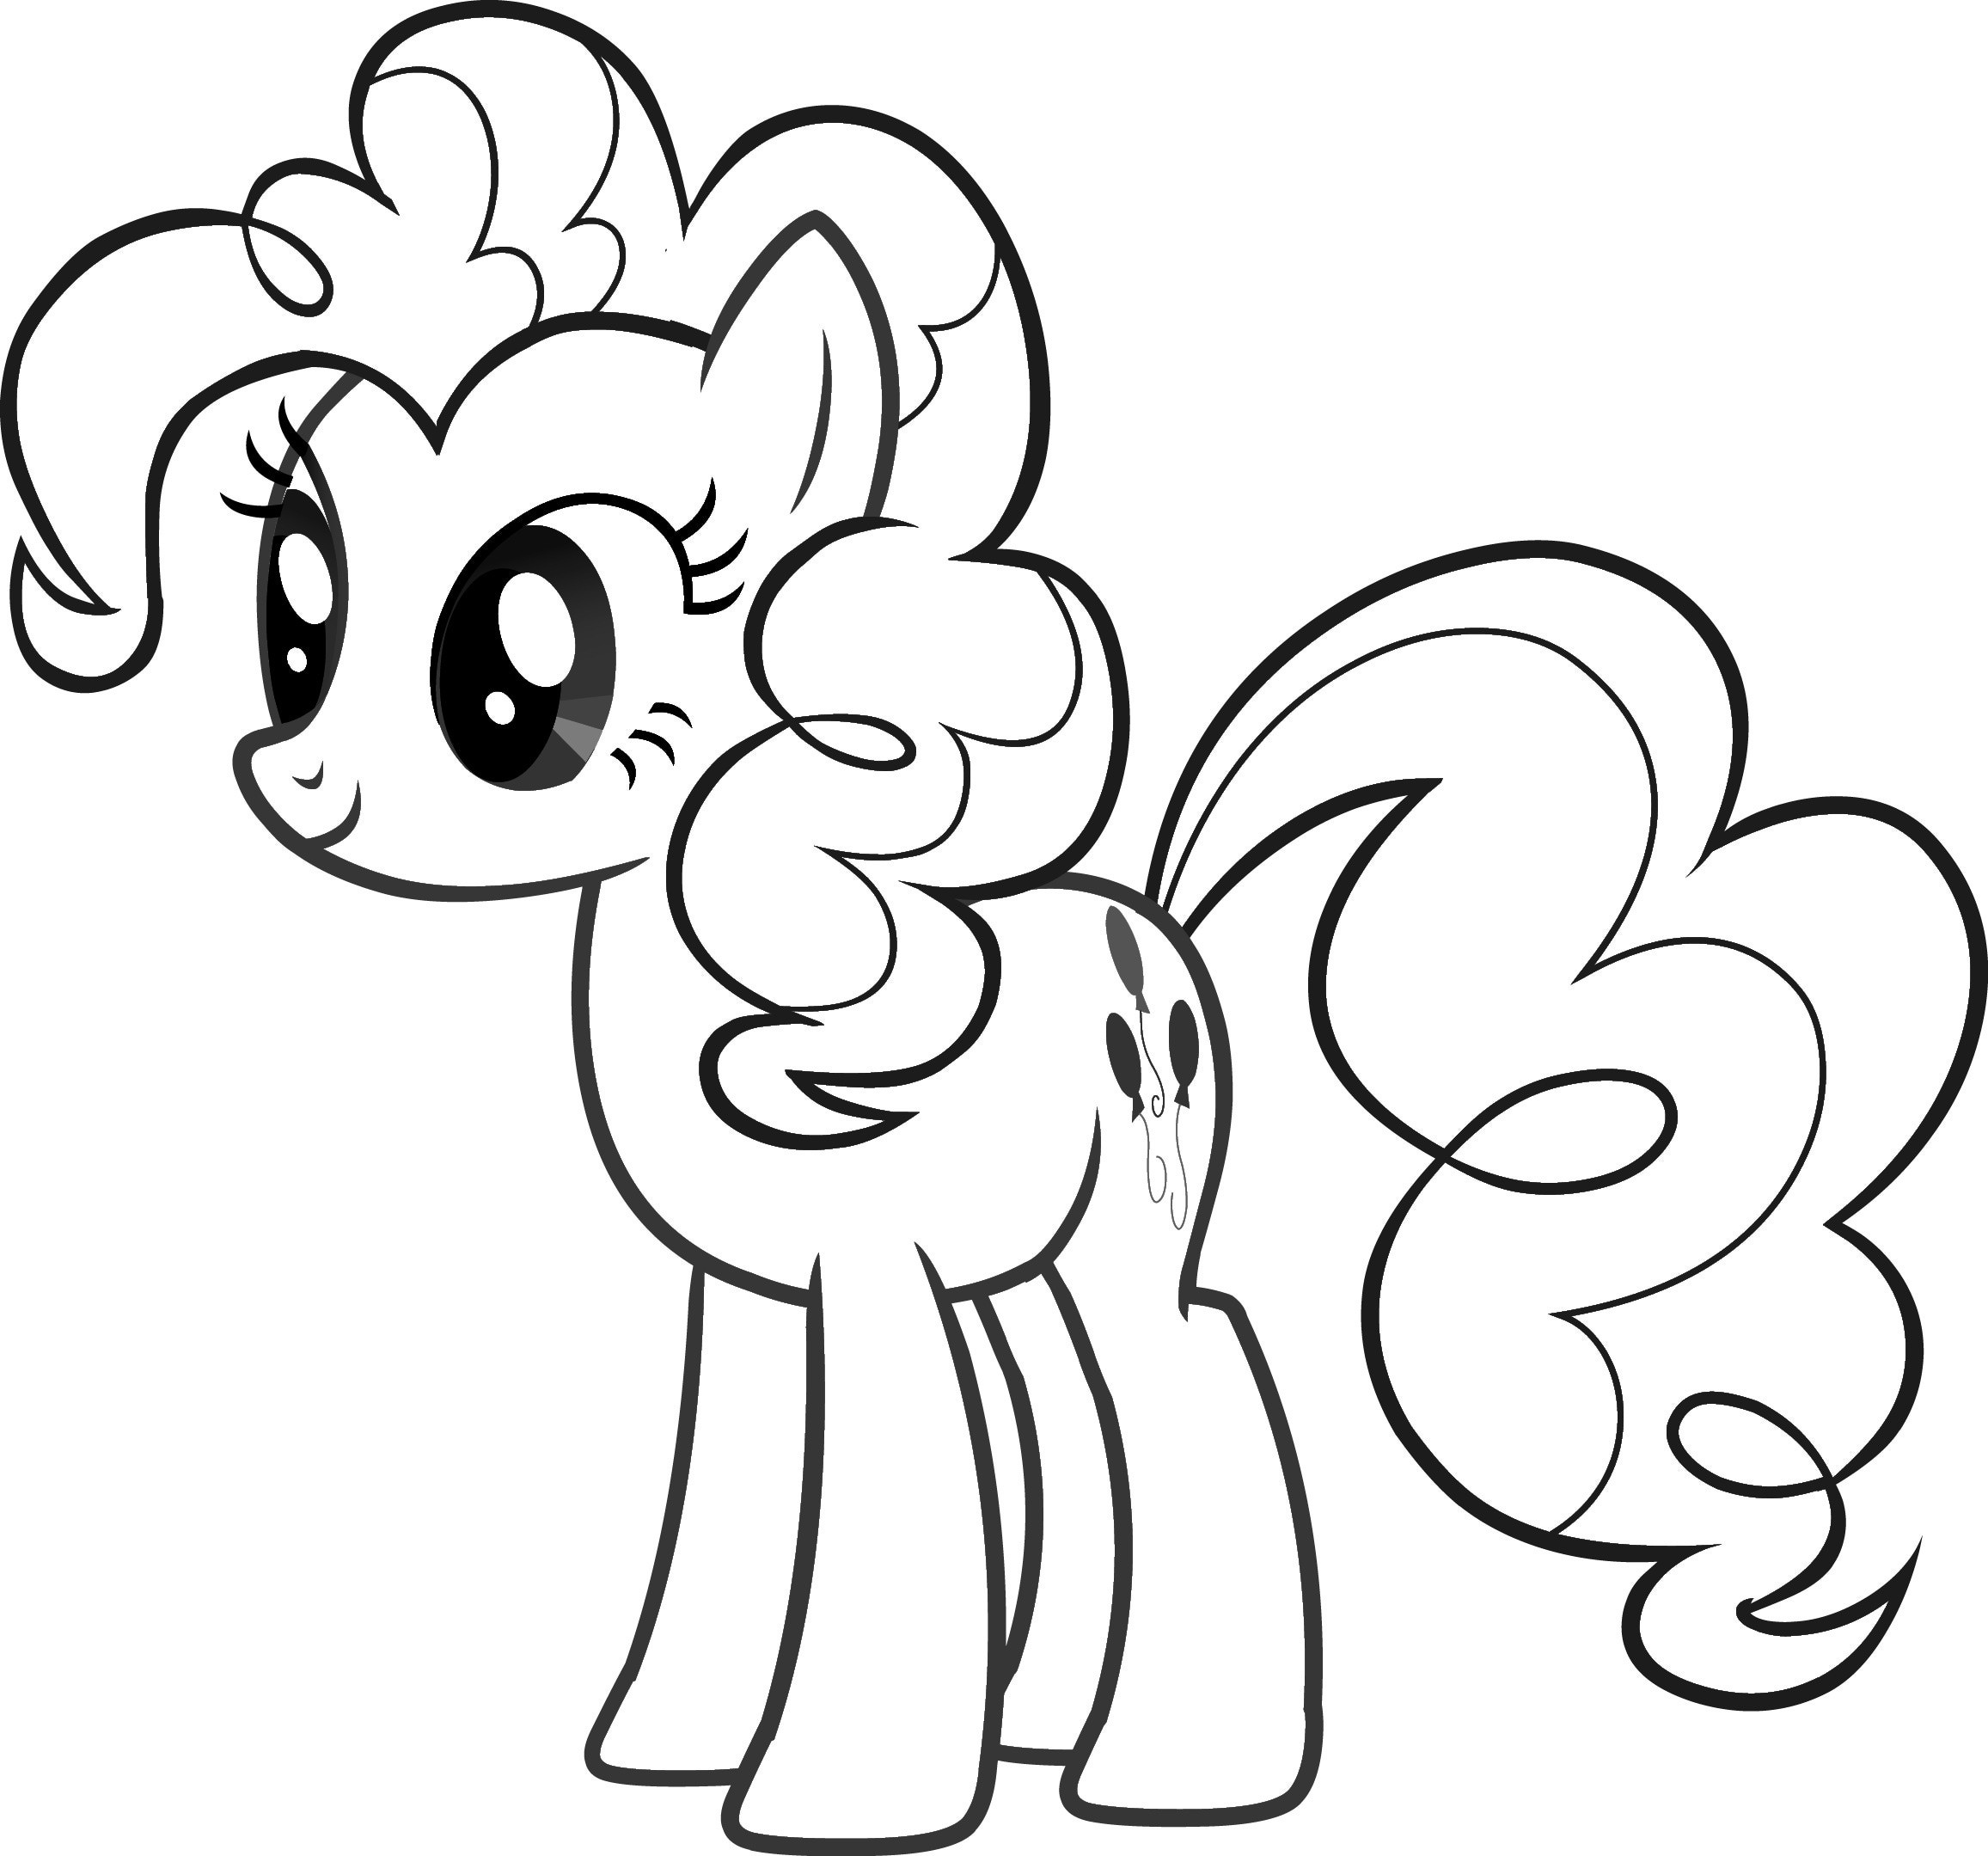 Printable Coloring Pages Girls
 My little pony coloring pages